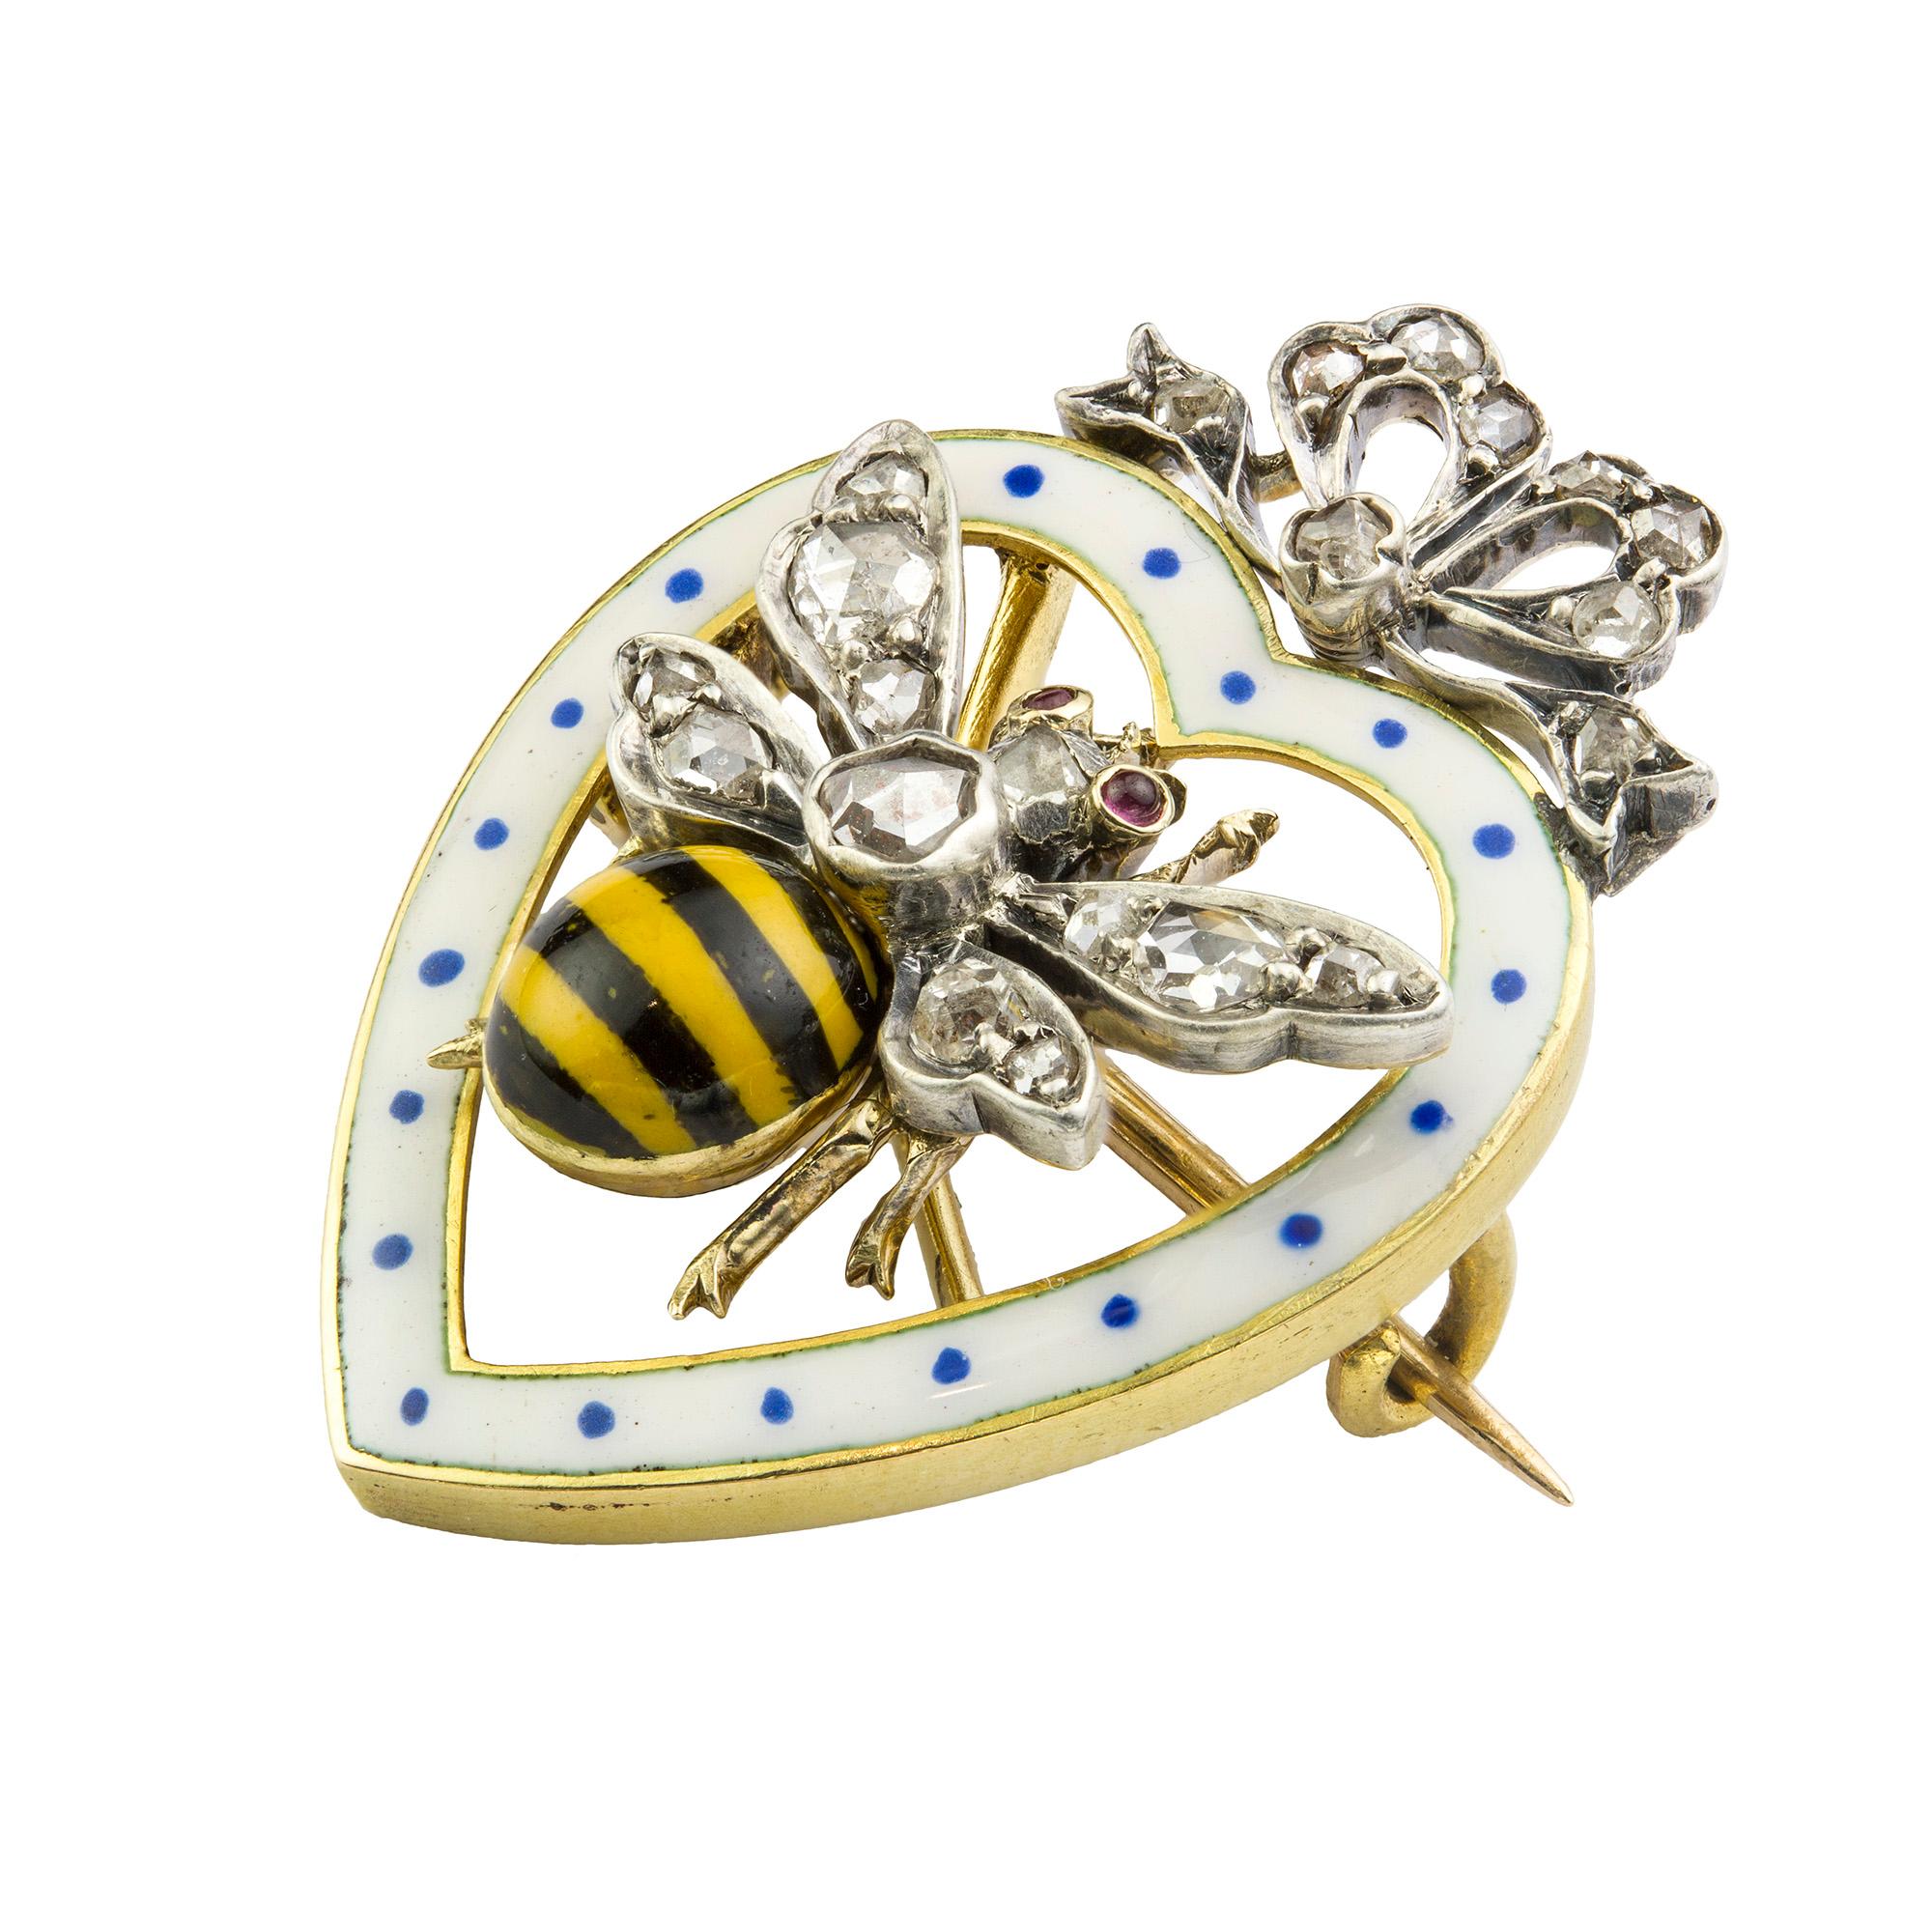 A late Victorian enamel and diamond bee brooch, the thorax and wings set with rose-cut diamonds, the abdomen with black and yellow enamel stripes, the eyes set with cabochon-cut rubes, surrounded by a heart-shaped white and blue enamelled frame with